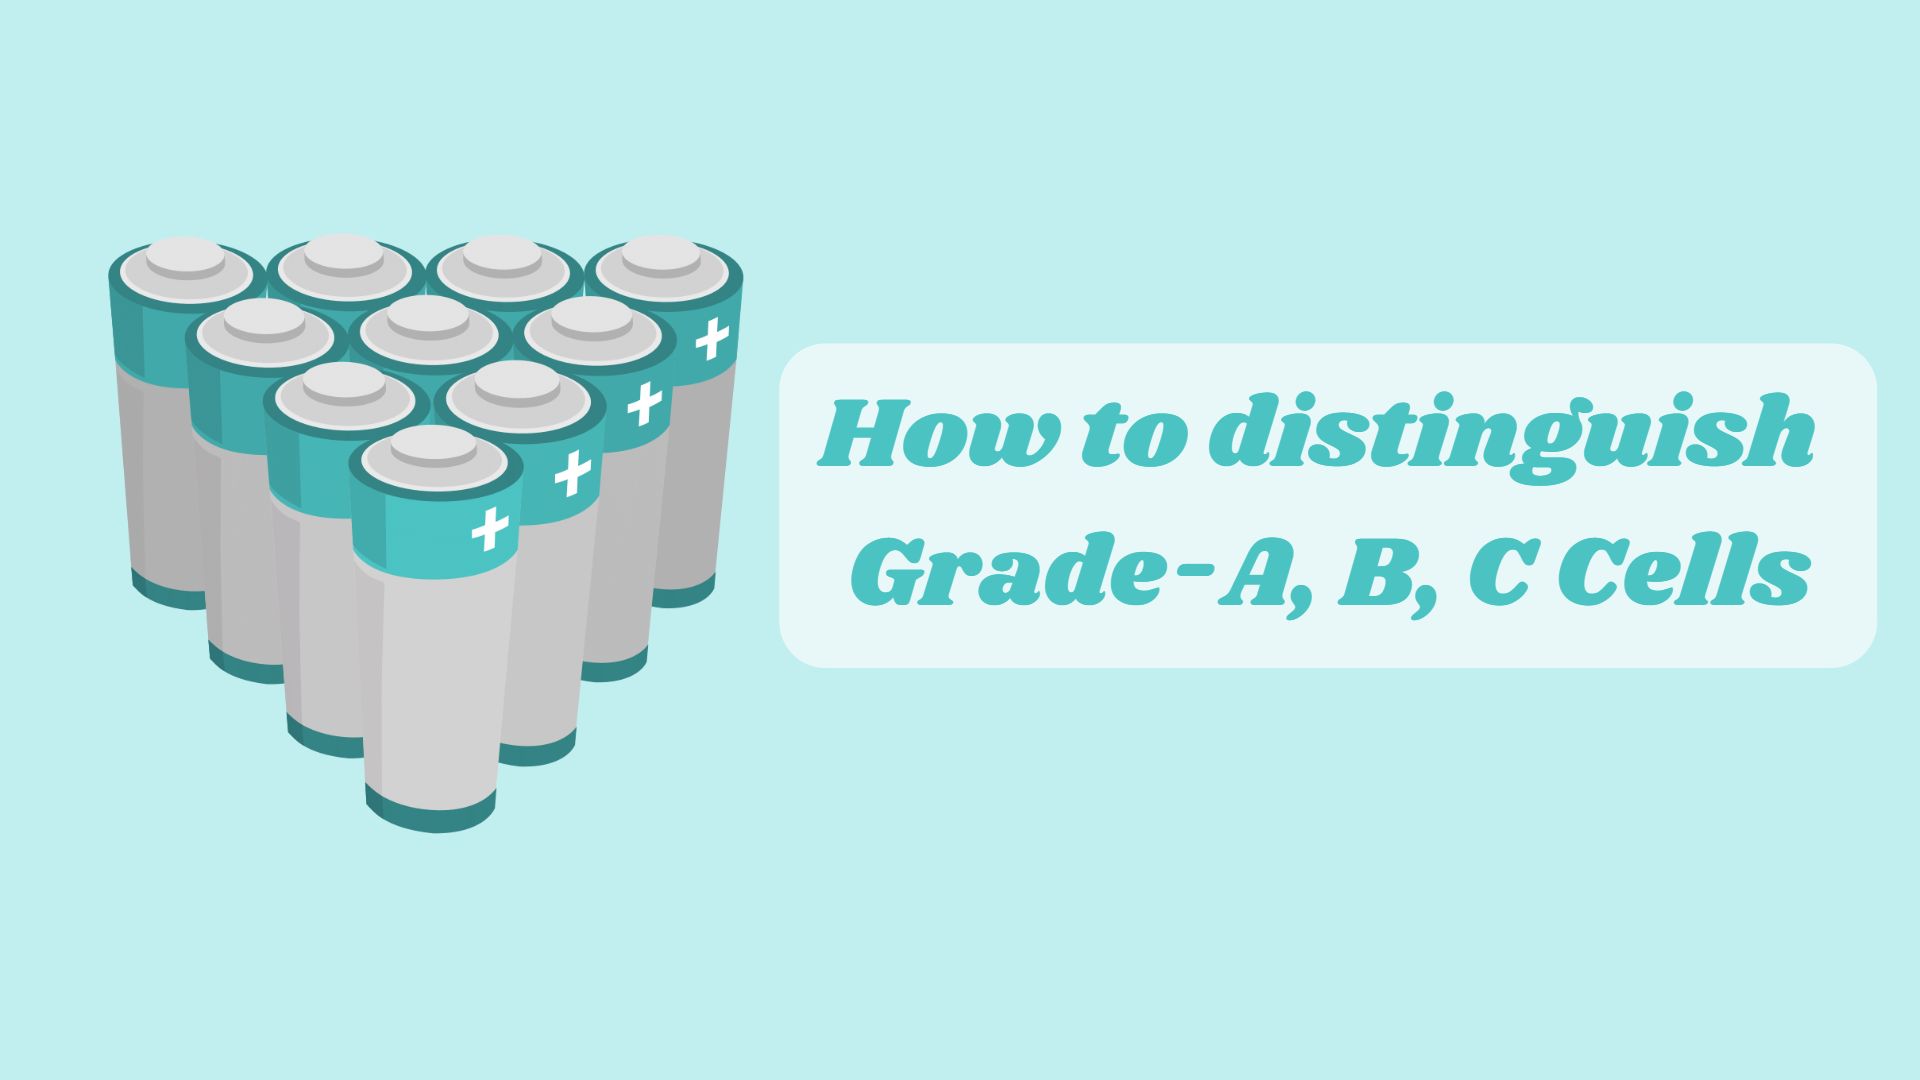 What are Grade-A, Grade-B, and Grade-C LiFePO4 cells? How to distinguish them?